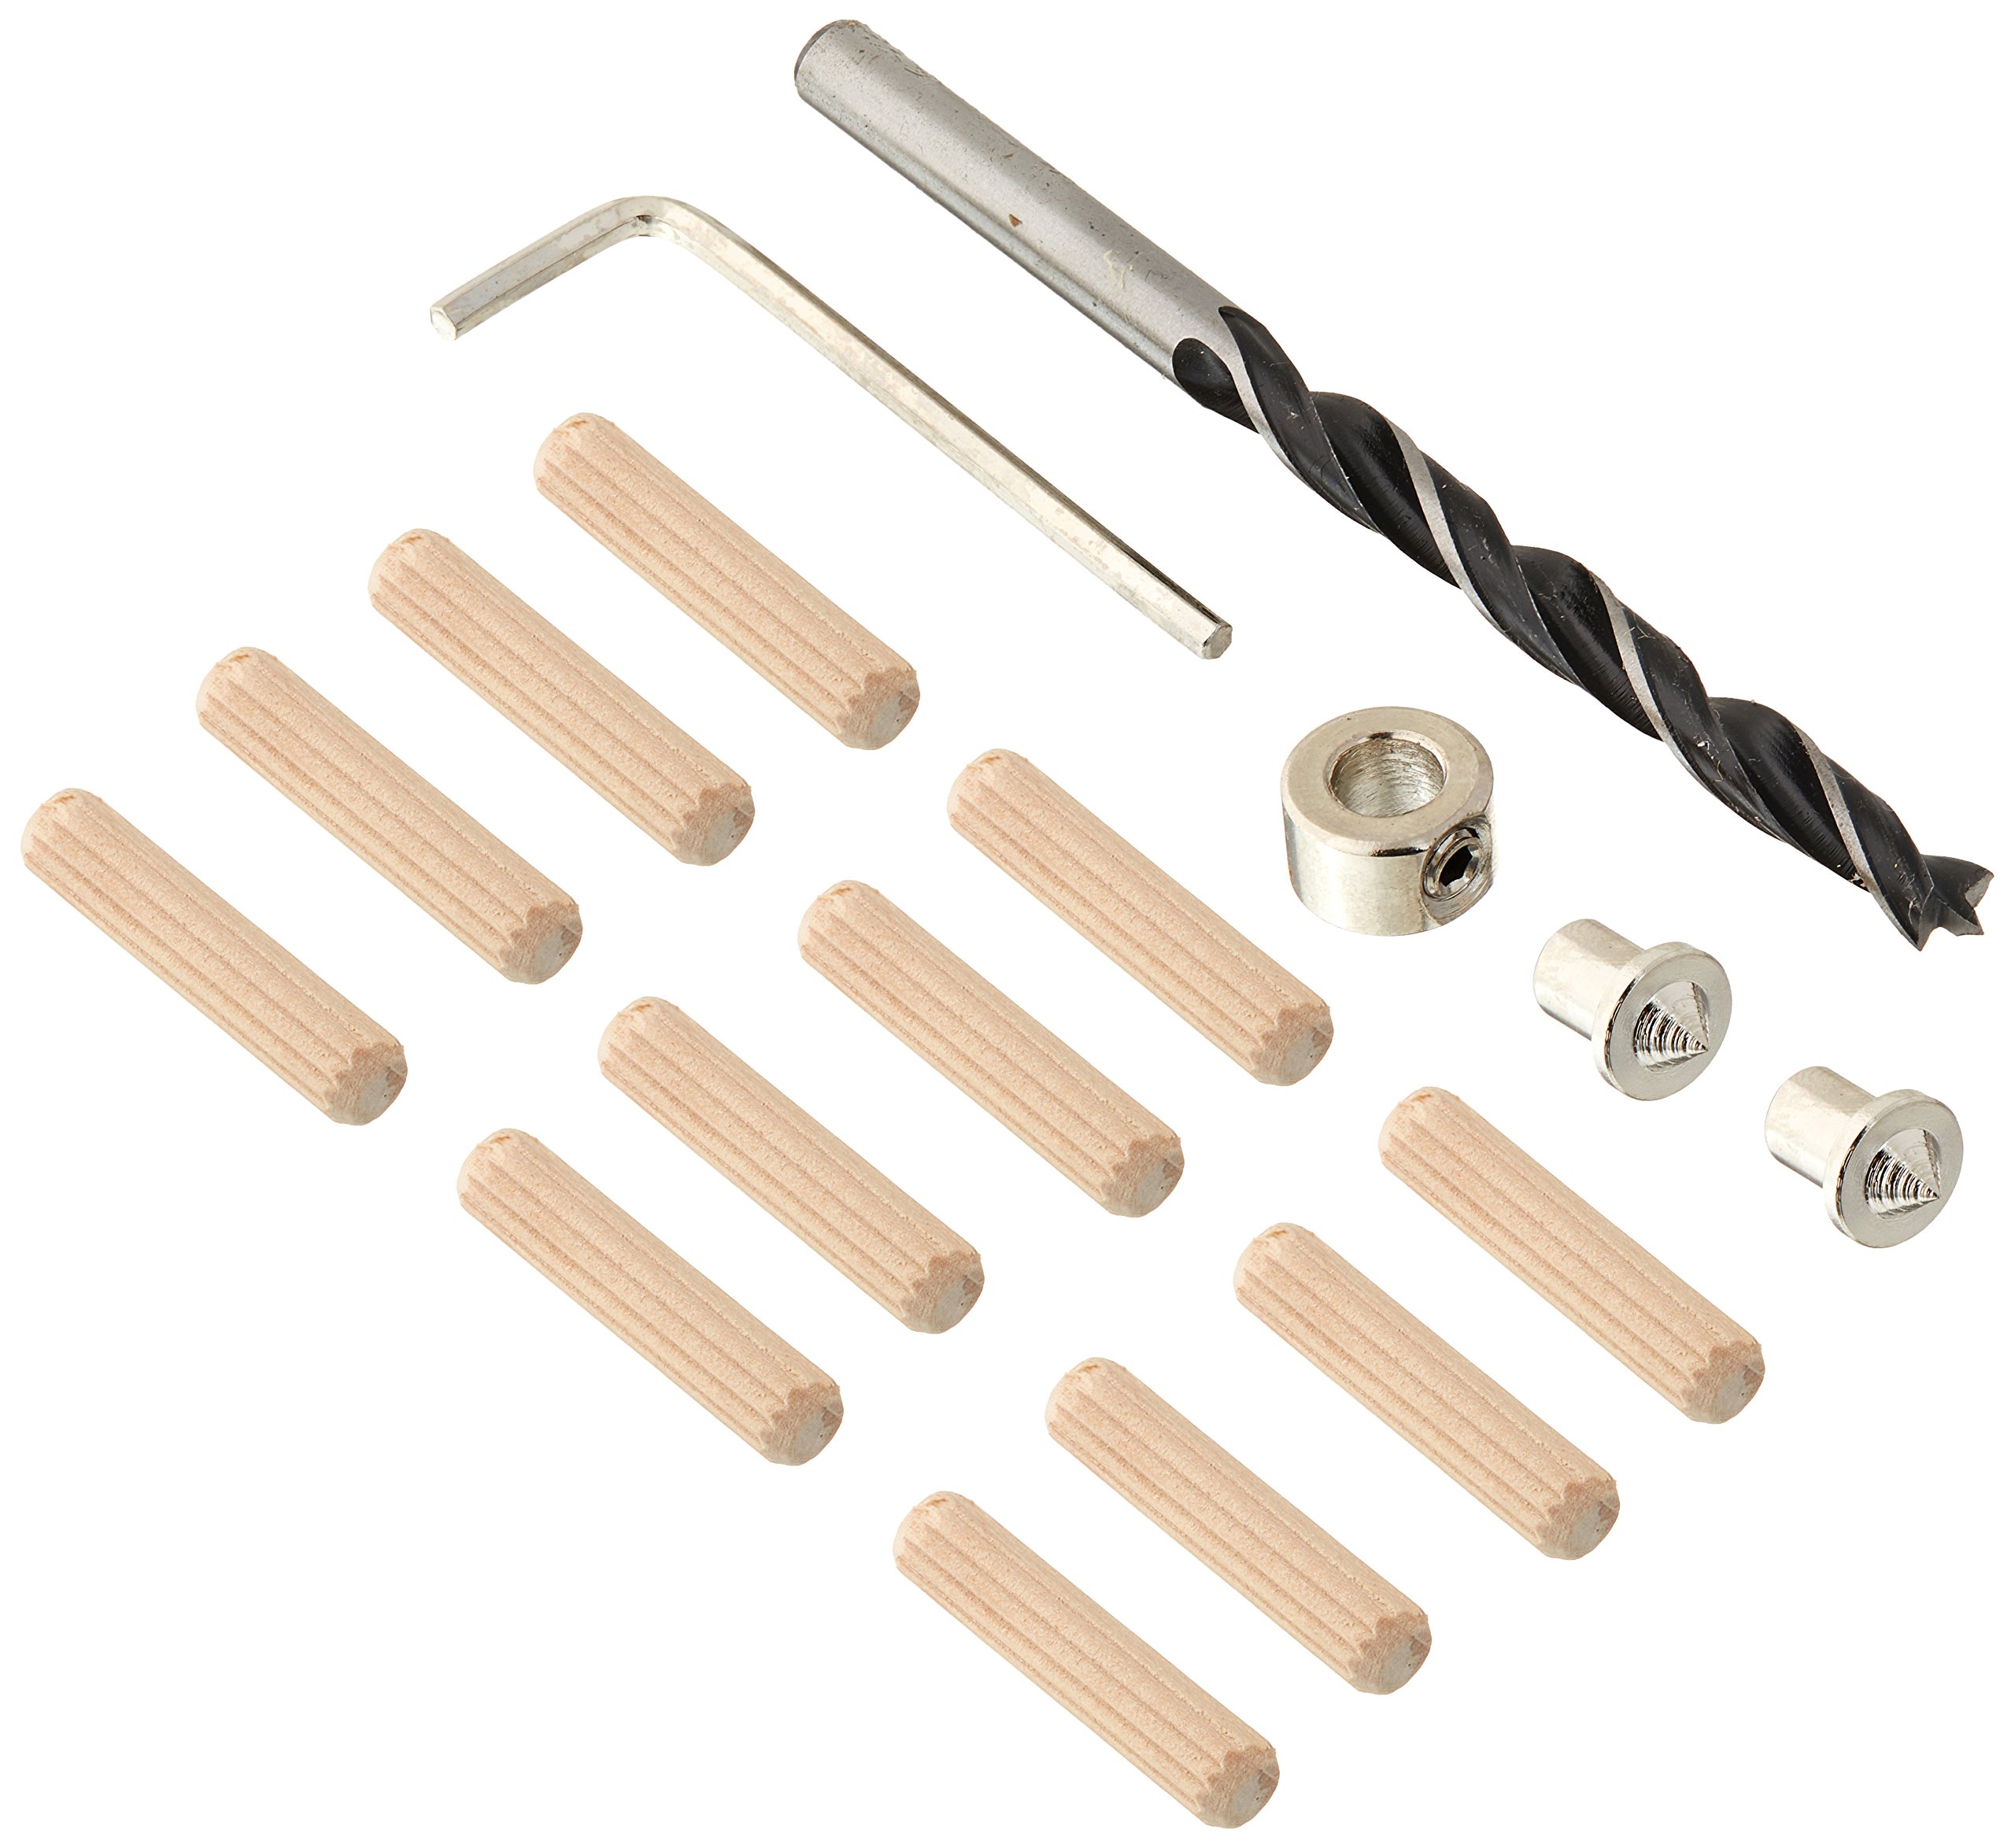 General Tools 841014 1/4-Inch Hardwood Dowel Accessory Kit, 17 Pieces for Furniture Building, Crafts and Other Wood Joining Projects